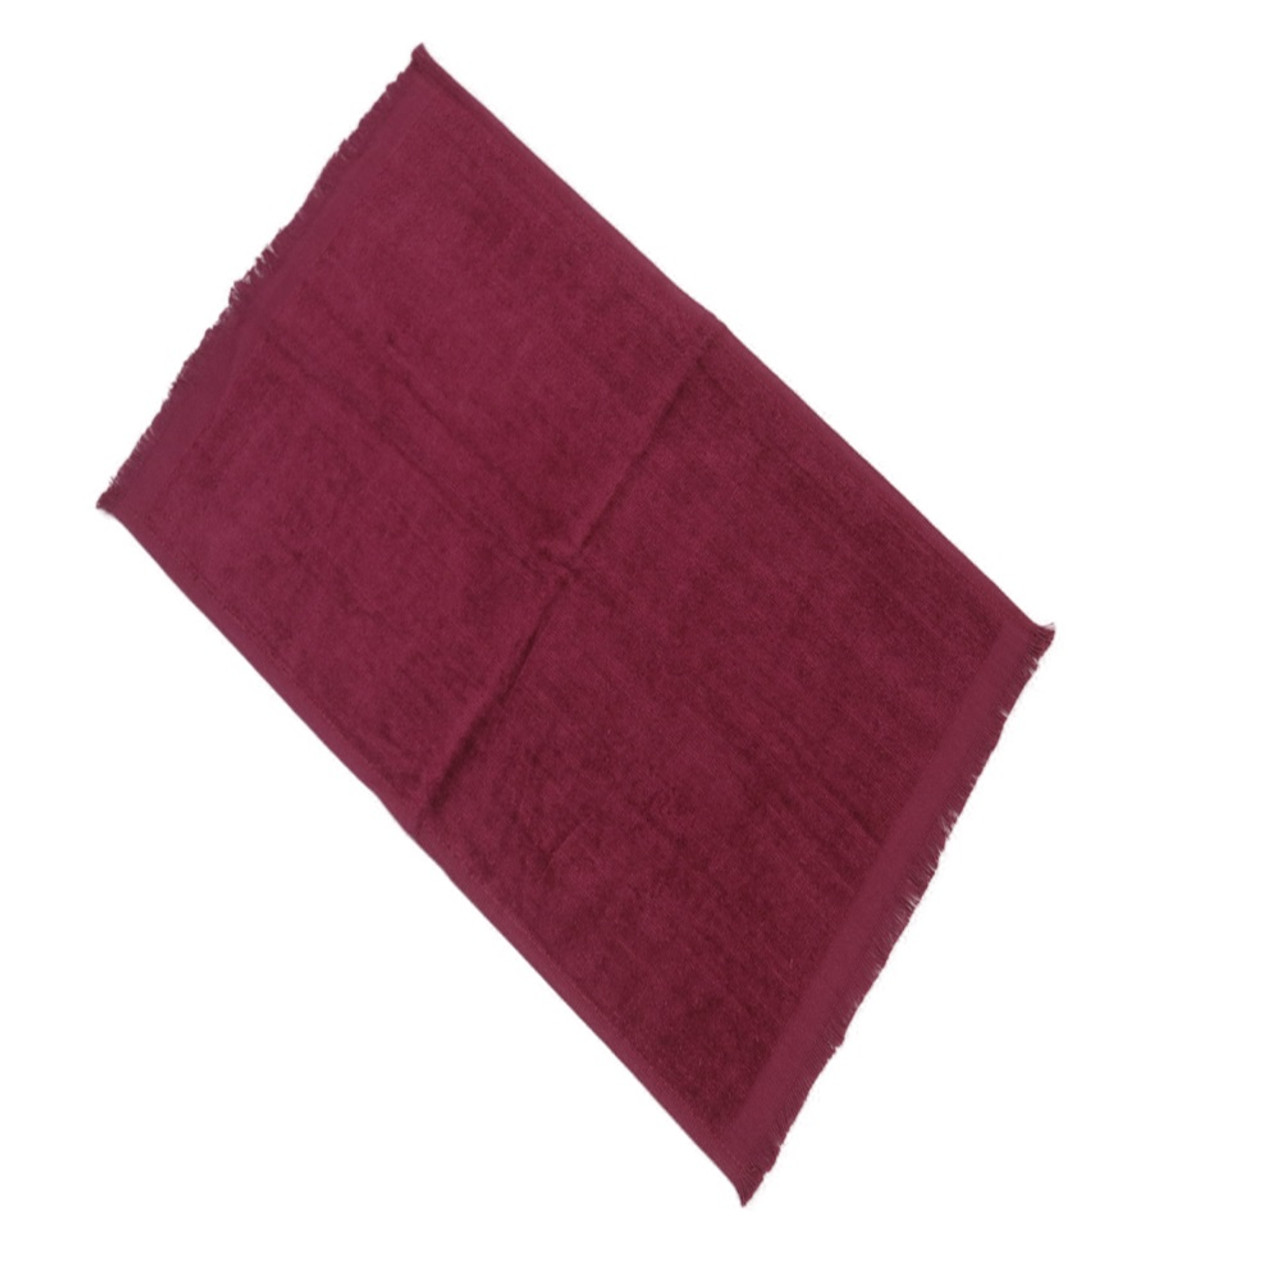 Wholesale Towels > 11x18 - BURGUNDY Rally Towels with Fringed Ends (Copy)